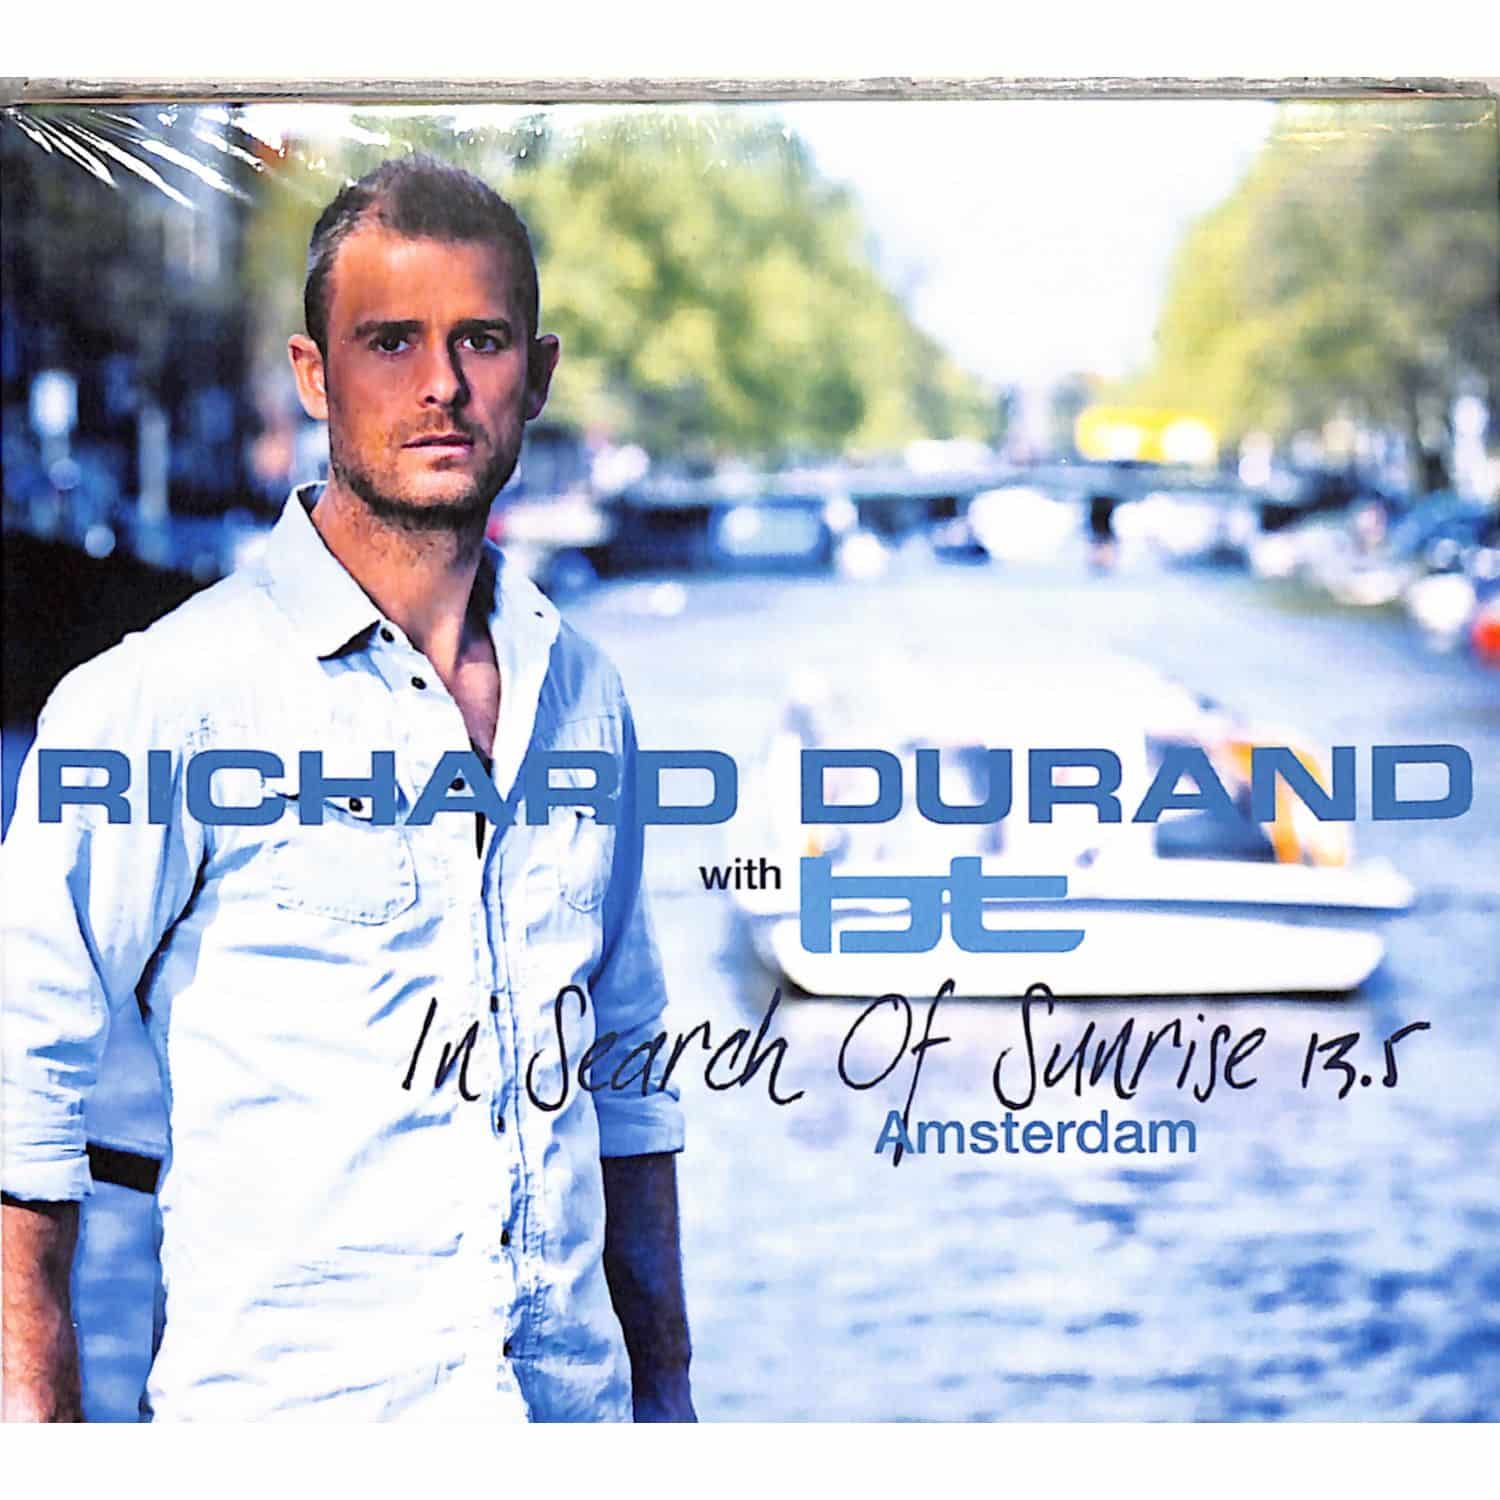 Richard Durand With BT - IN SEARCH OF SUNRISE 13.5 